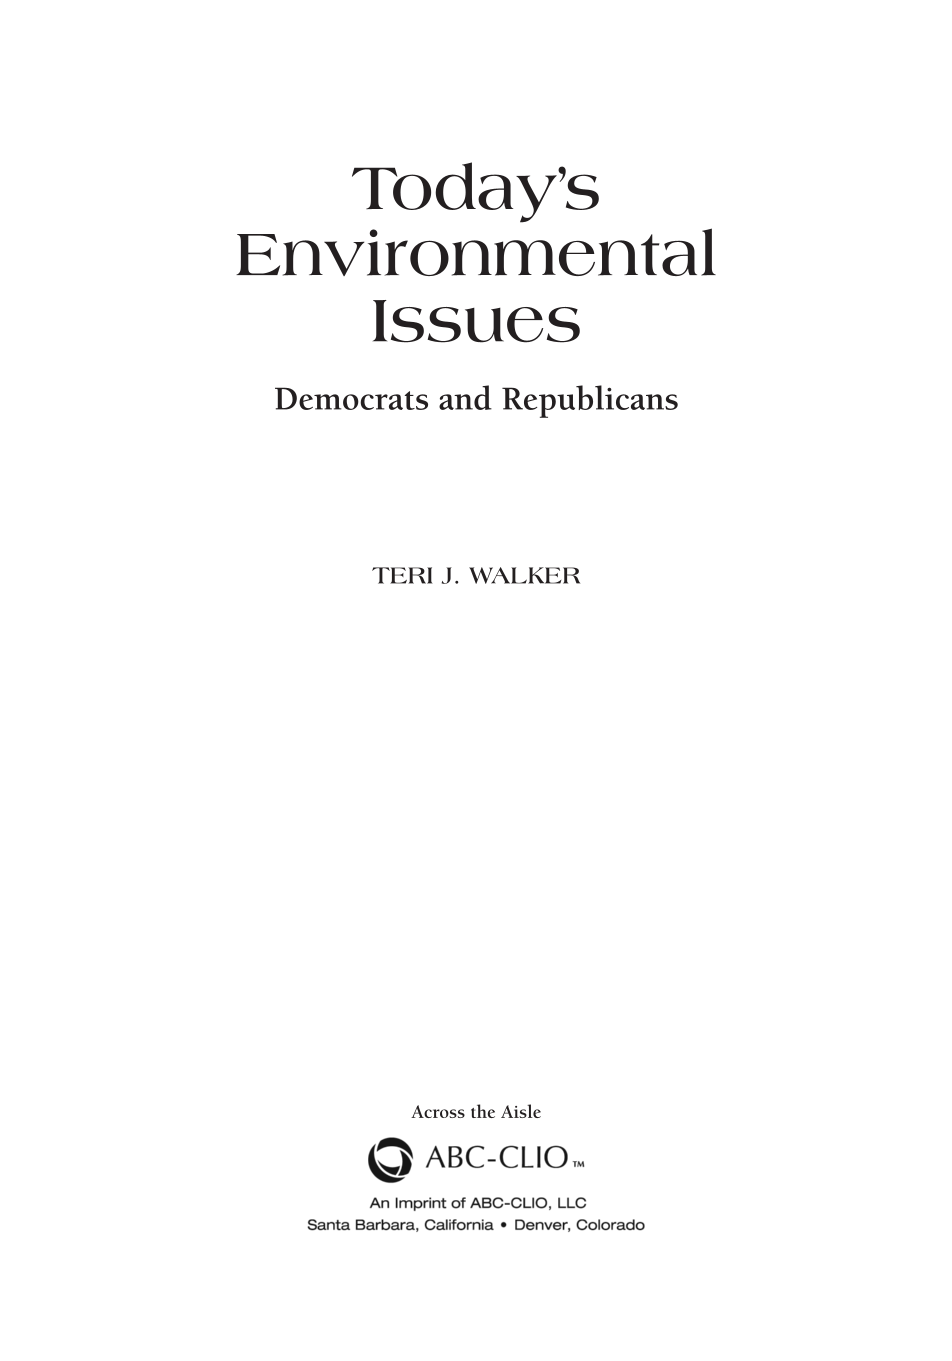 Today's Environmental Issues: Democrats and Republicans page iii